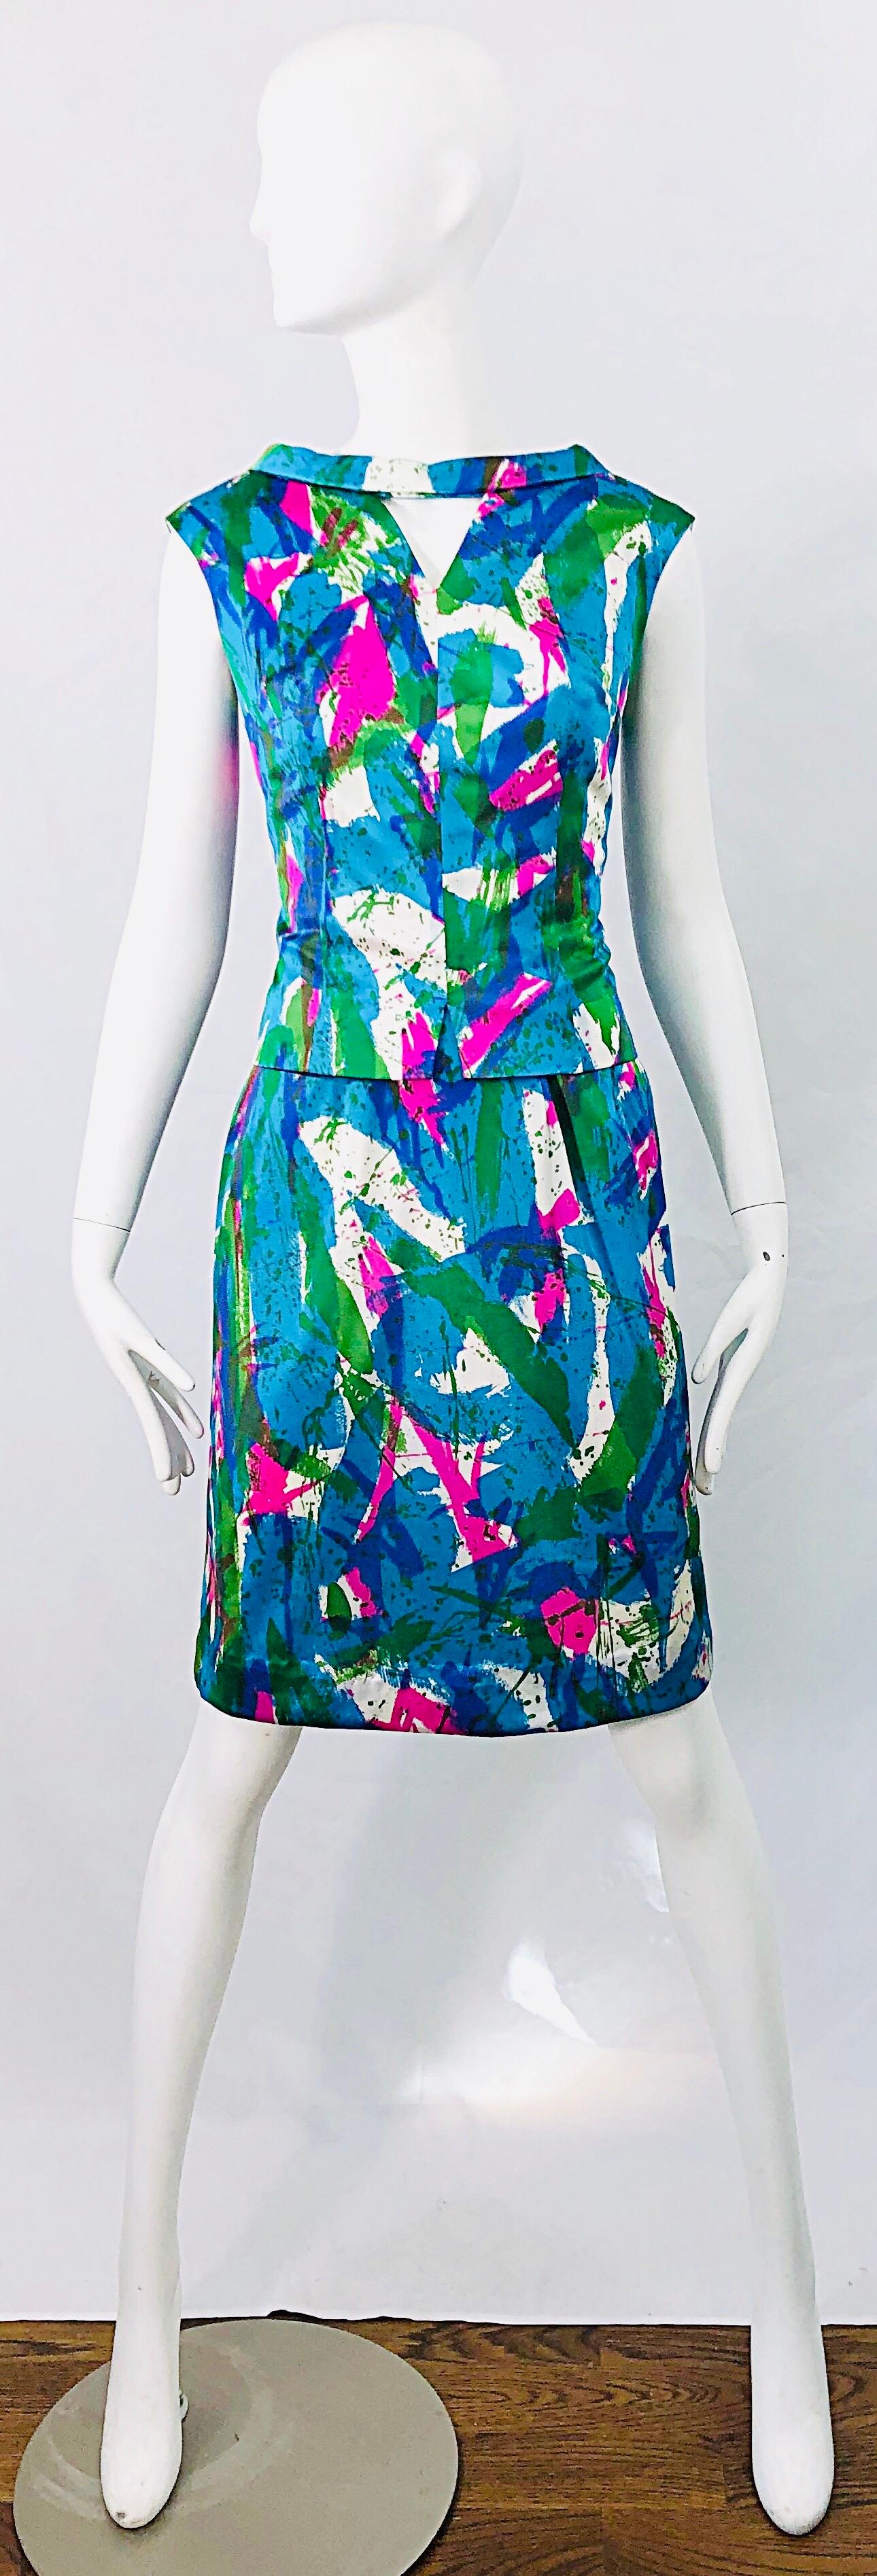 Chic 1960s Neon Abstract Print Two Piece Vintage 60s Sheath Dress + Top Blouse  For Sale 9